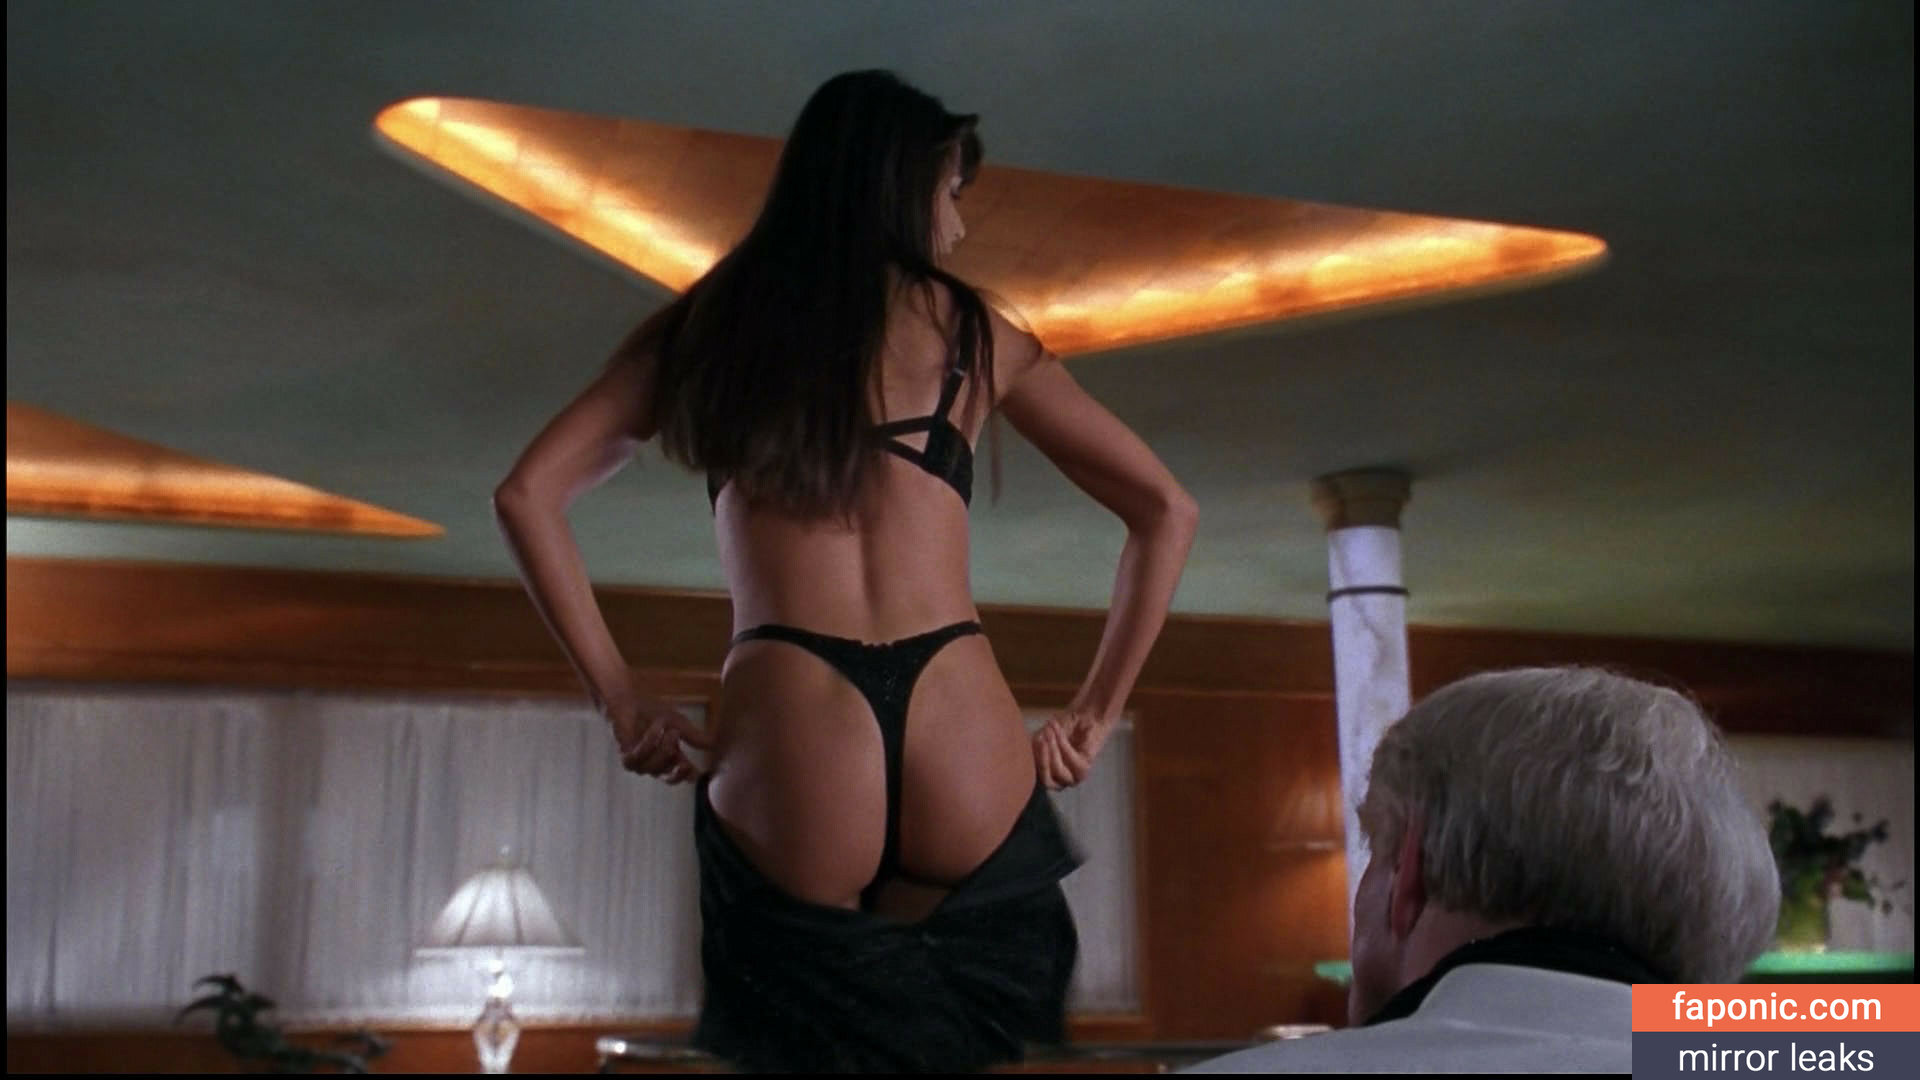 A Gallery of Scintillating Shots: Demi Moore's Perfect Butt